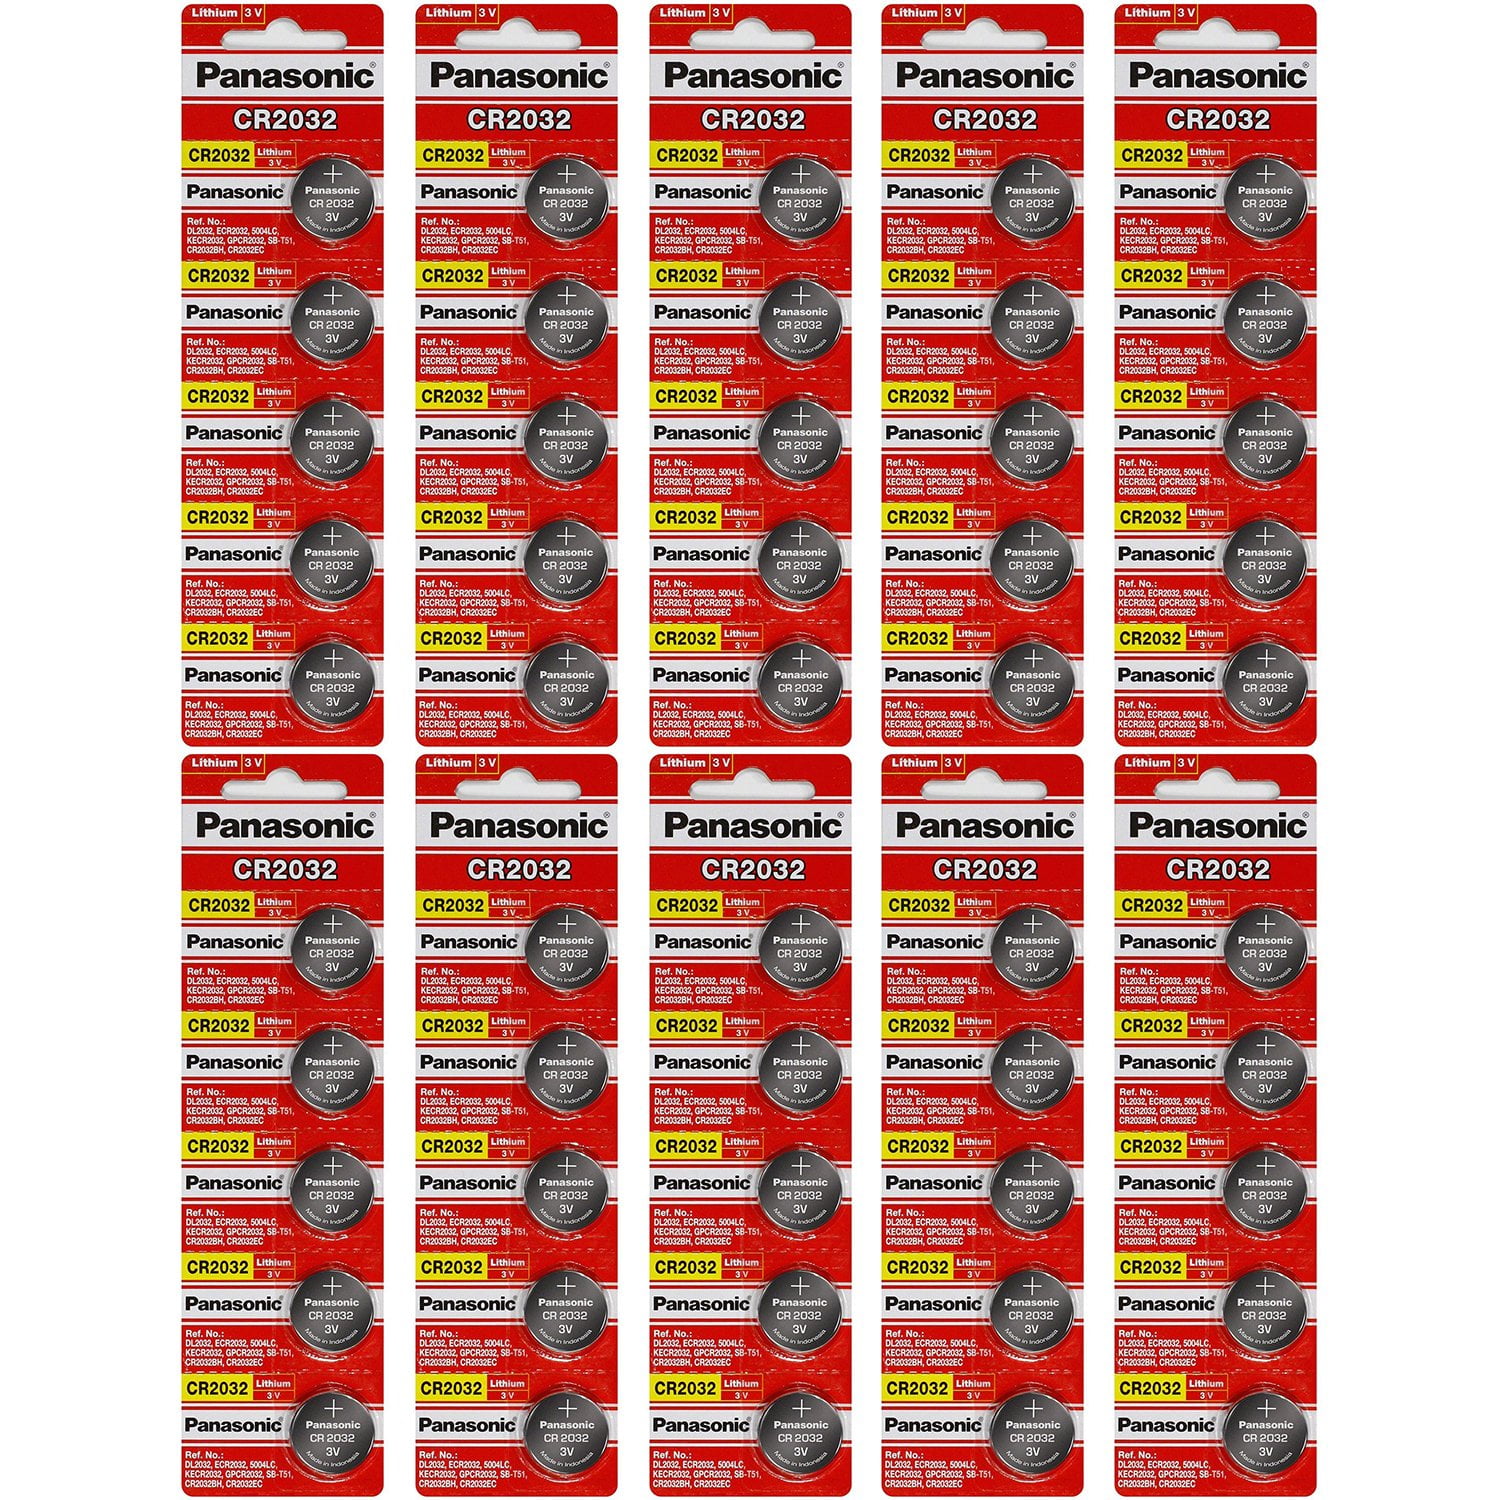 50-Pack Panasonic CR2477 3 Volt Lithium Coin Cell Batteries